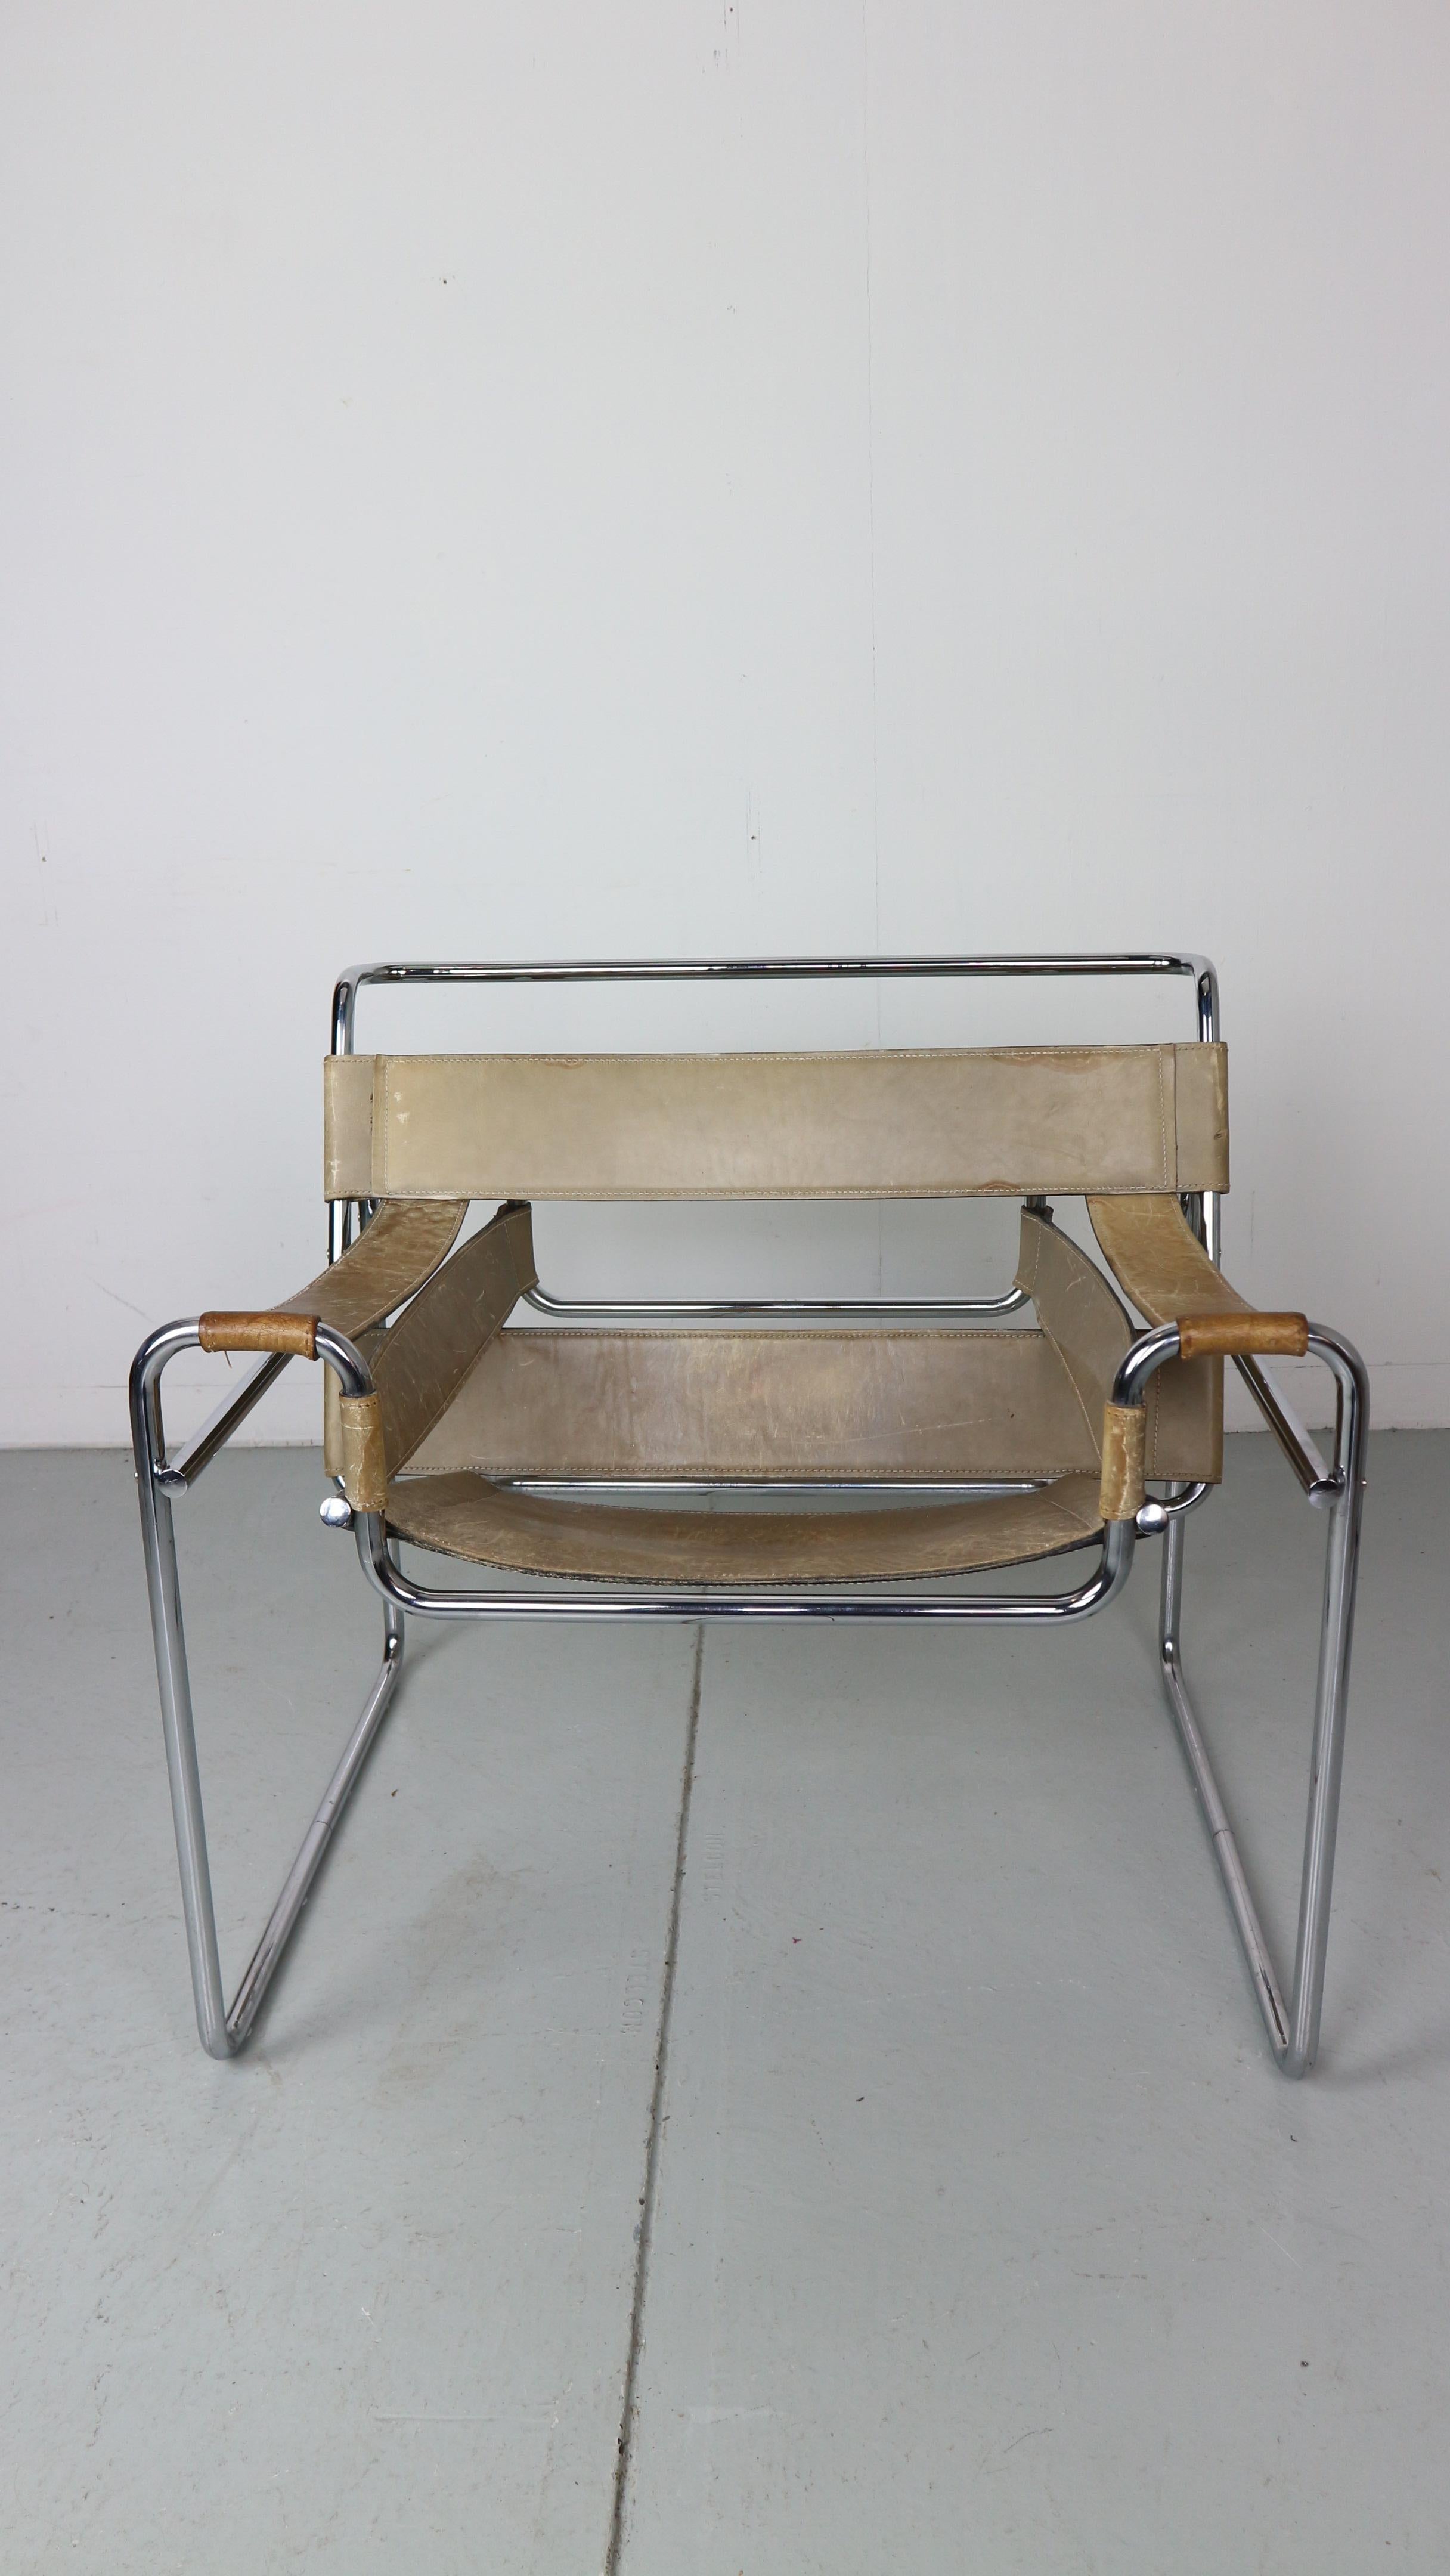 We are delighted to offer for sale this stunning vintage 1970s Marcel Breuer for Fasem Wassily B3 cream leather armchair. A timeless design Classic, upholstered in thick high quality leather hide and with a tubular chrome frame, these chairs are